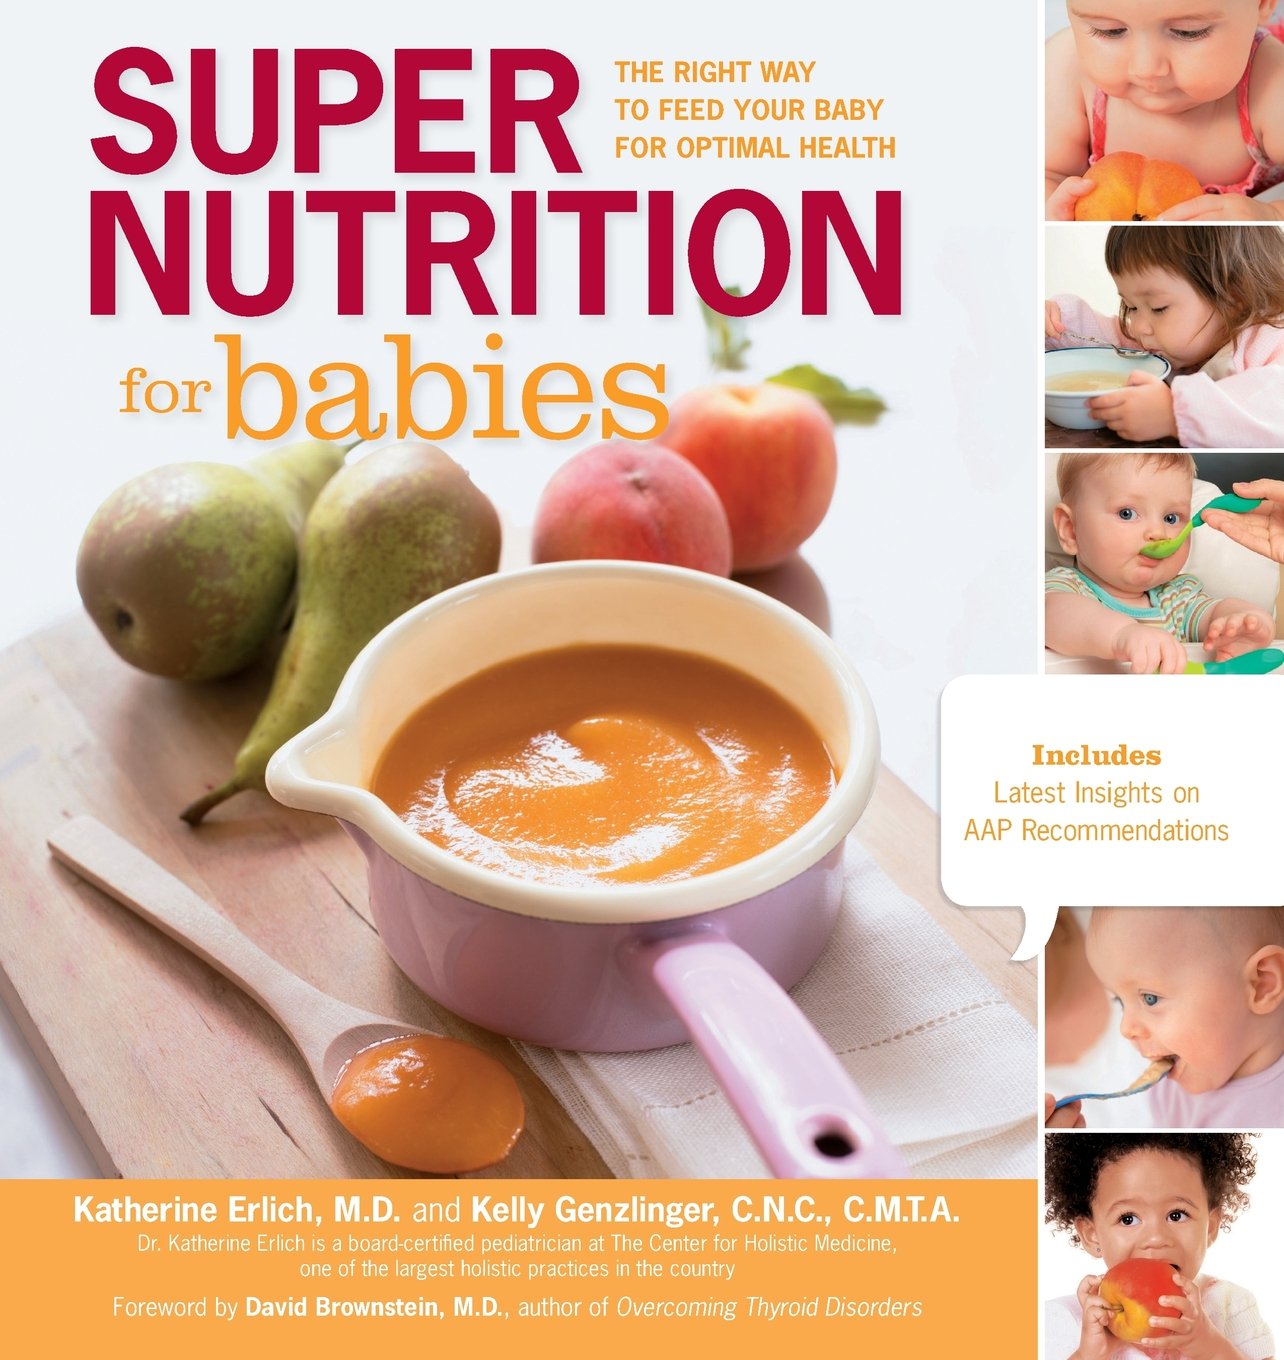 Super Nutrition for Babies: The Right Way to Feed Your Baby for Optimal Health (Katherine Erlich, Kelly Genzlinger)